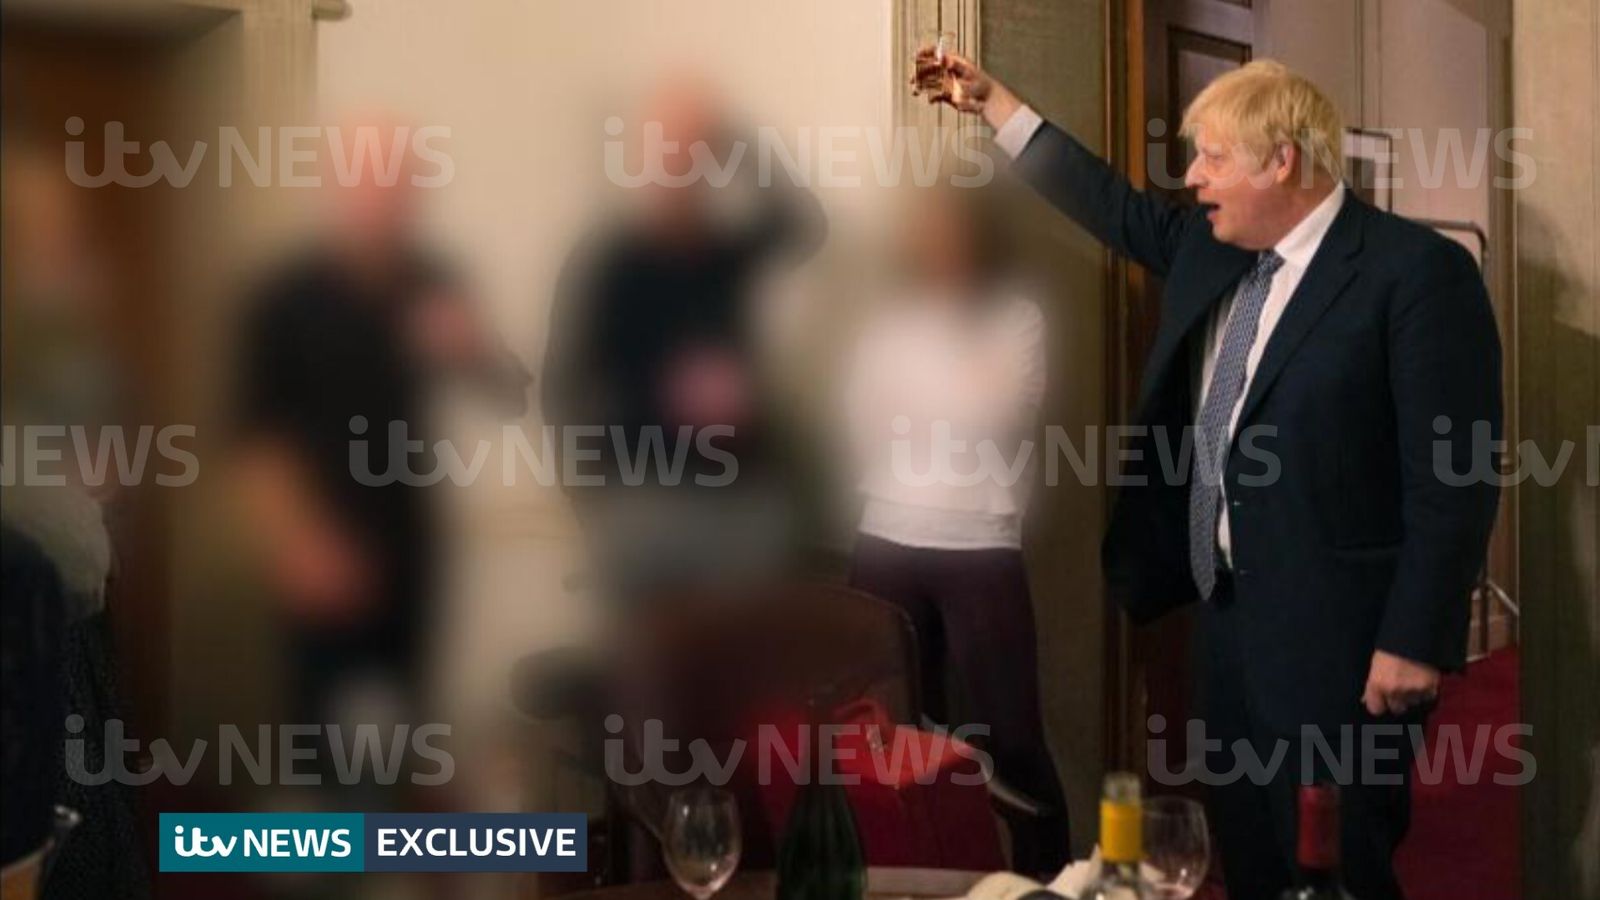 Partygate: Tory MPs criticise photos of PM at lockdown drinks ahead of Sue Gray report | Politics News